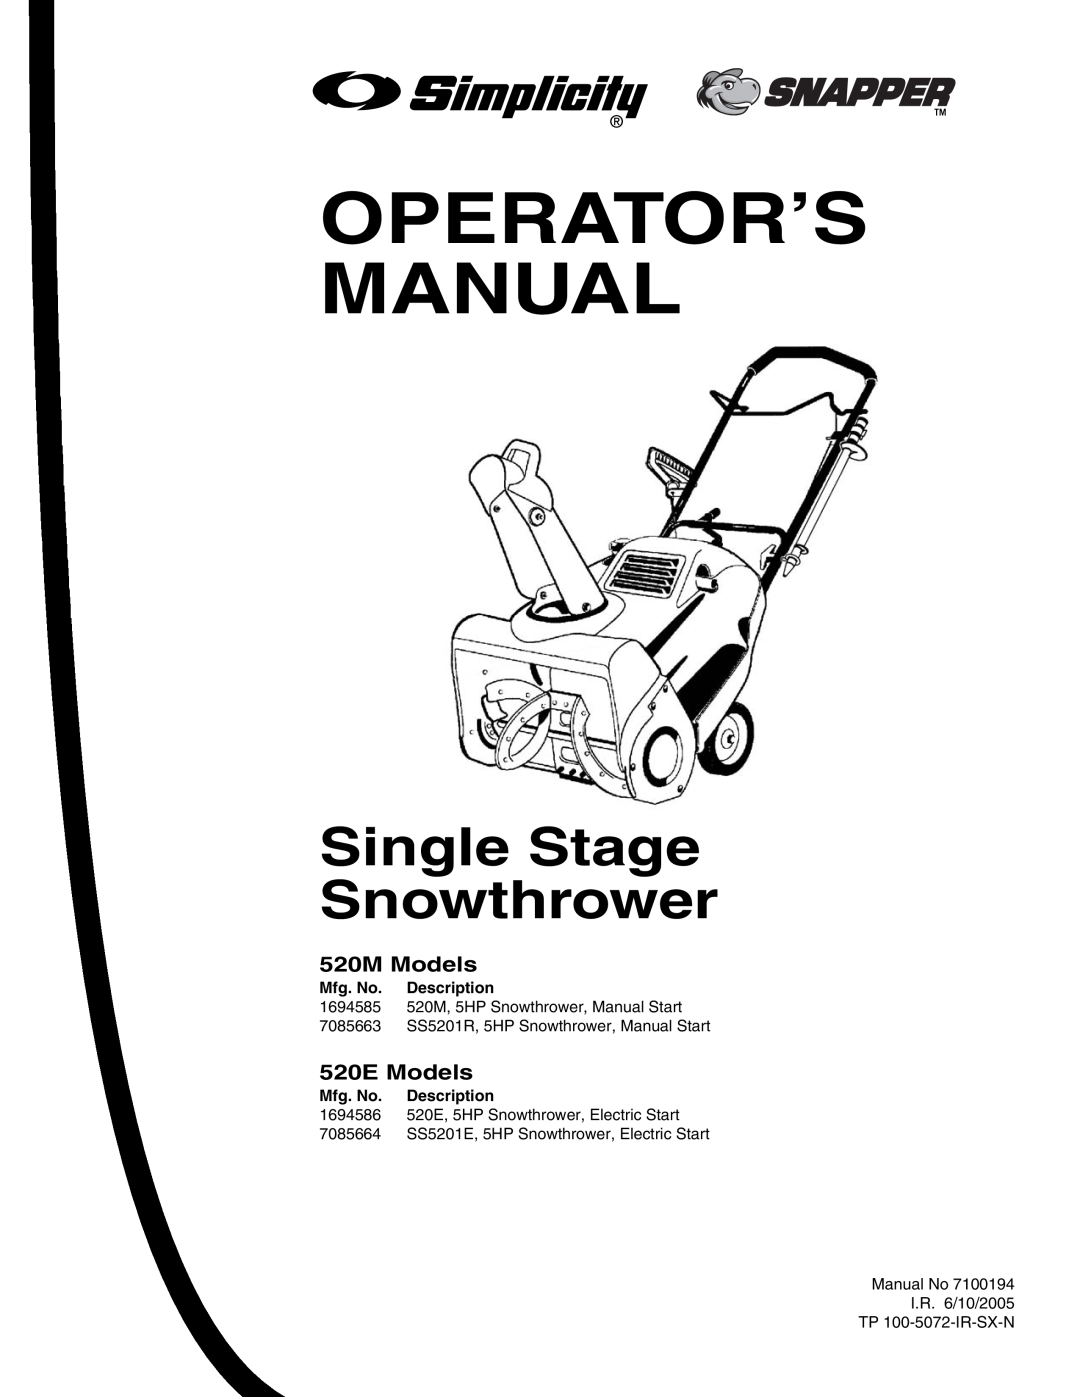 Simplicity 520M, 520E manual 520M Models, 520E Models, Operator’S Manual, Single Stage Snowthrower 